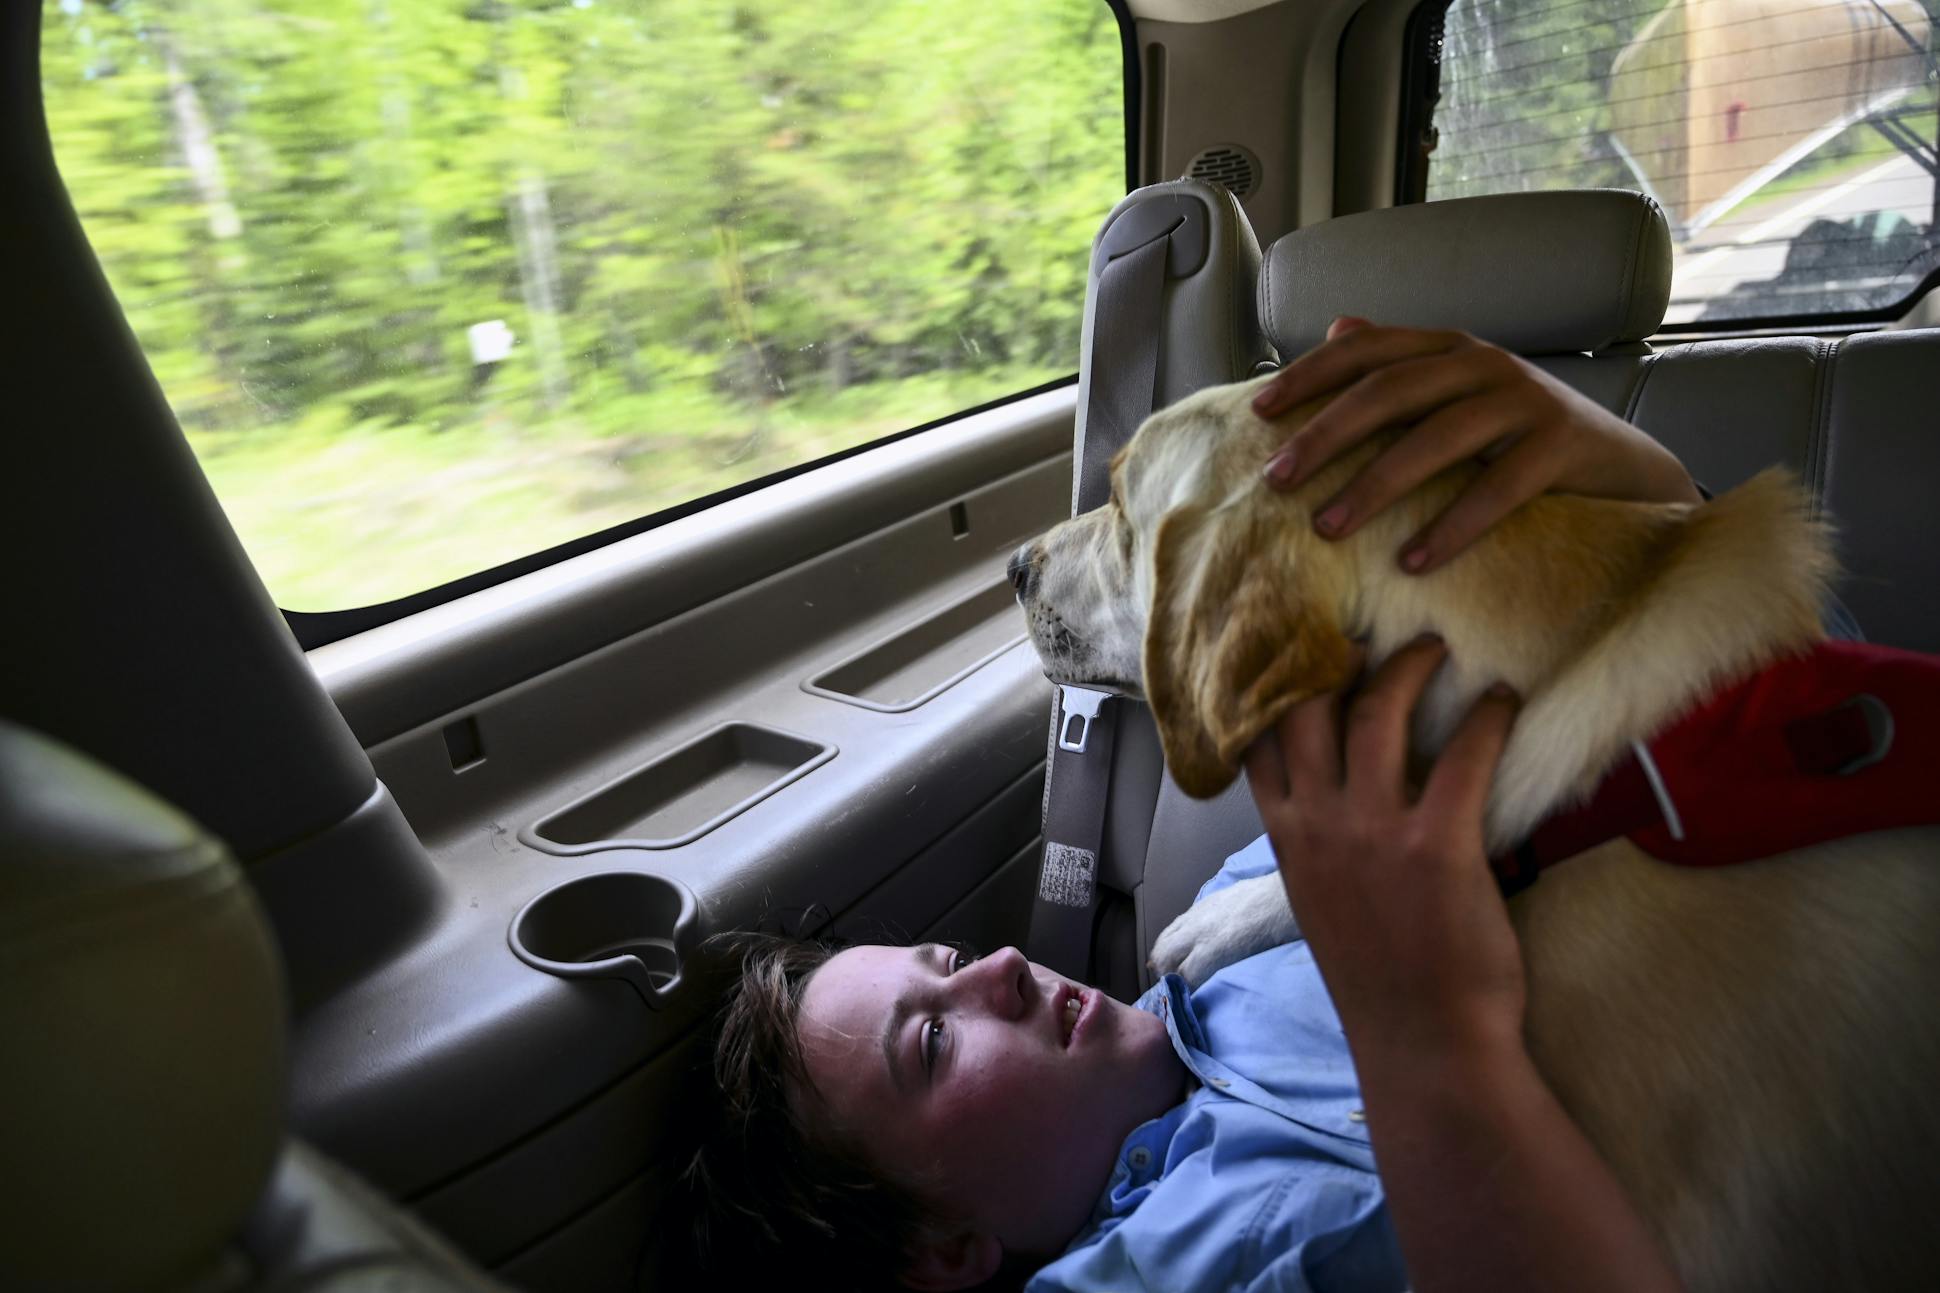 Aidan Jones rested with his dog, Crosby, as they headed down the Arrowhead Trail after ending their trip.